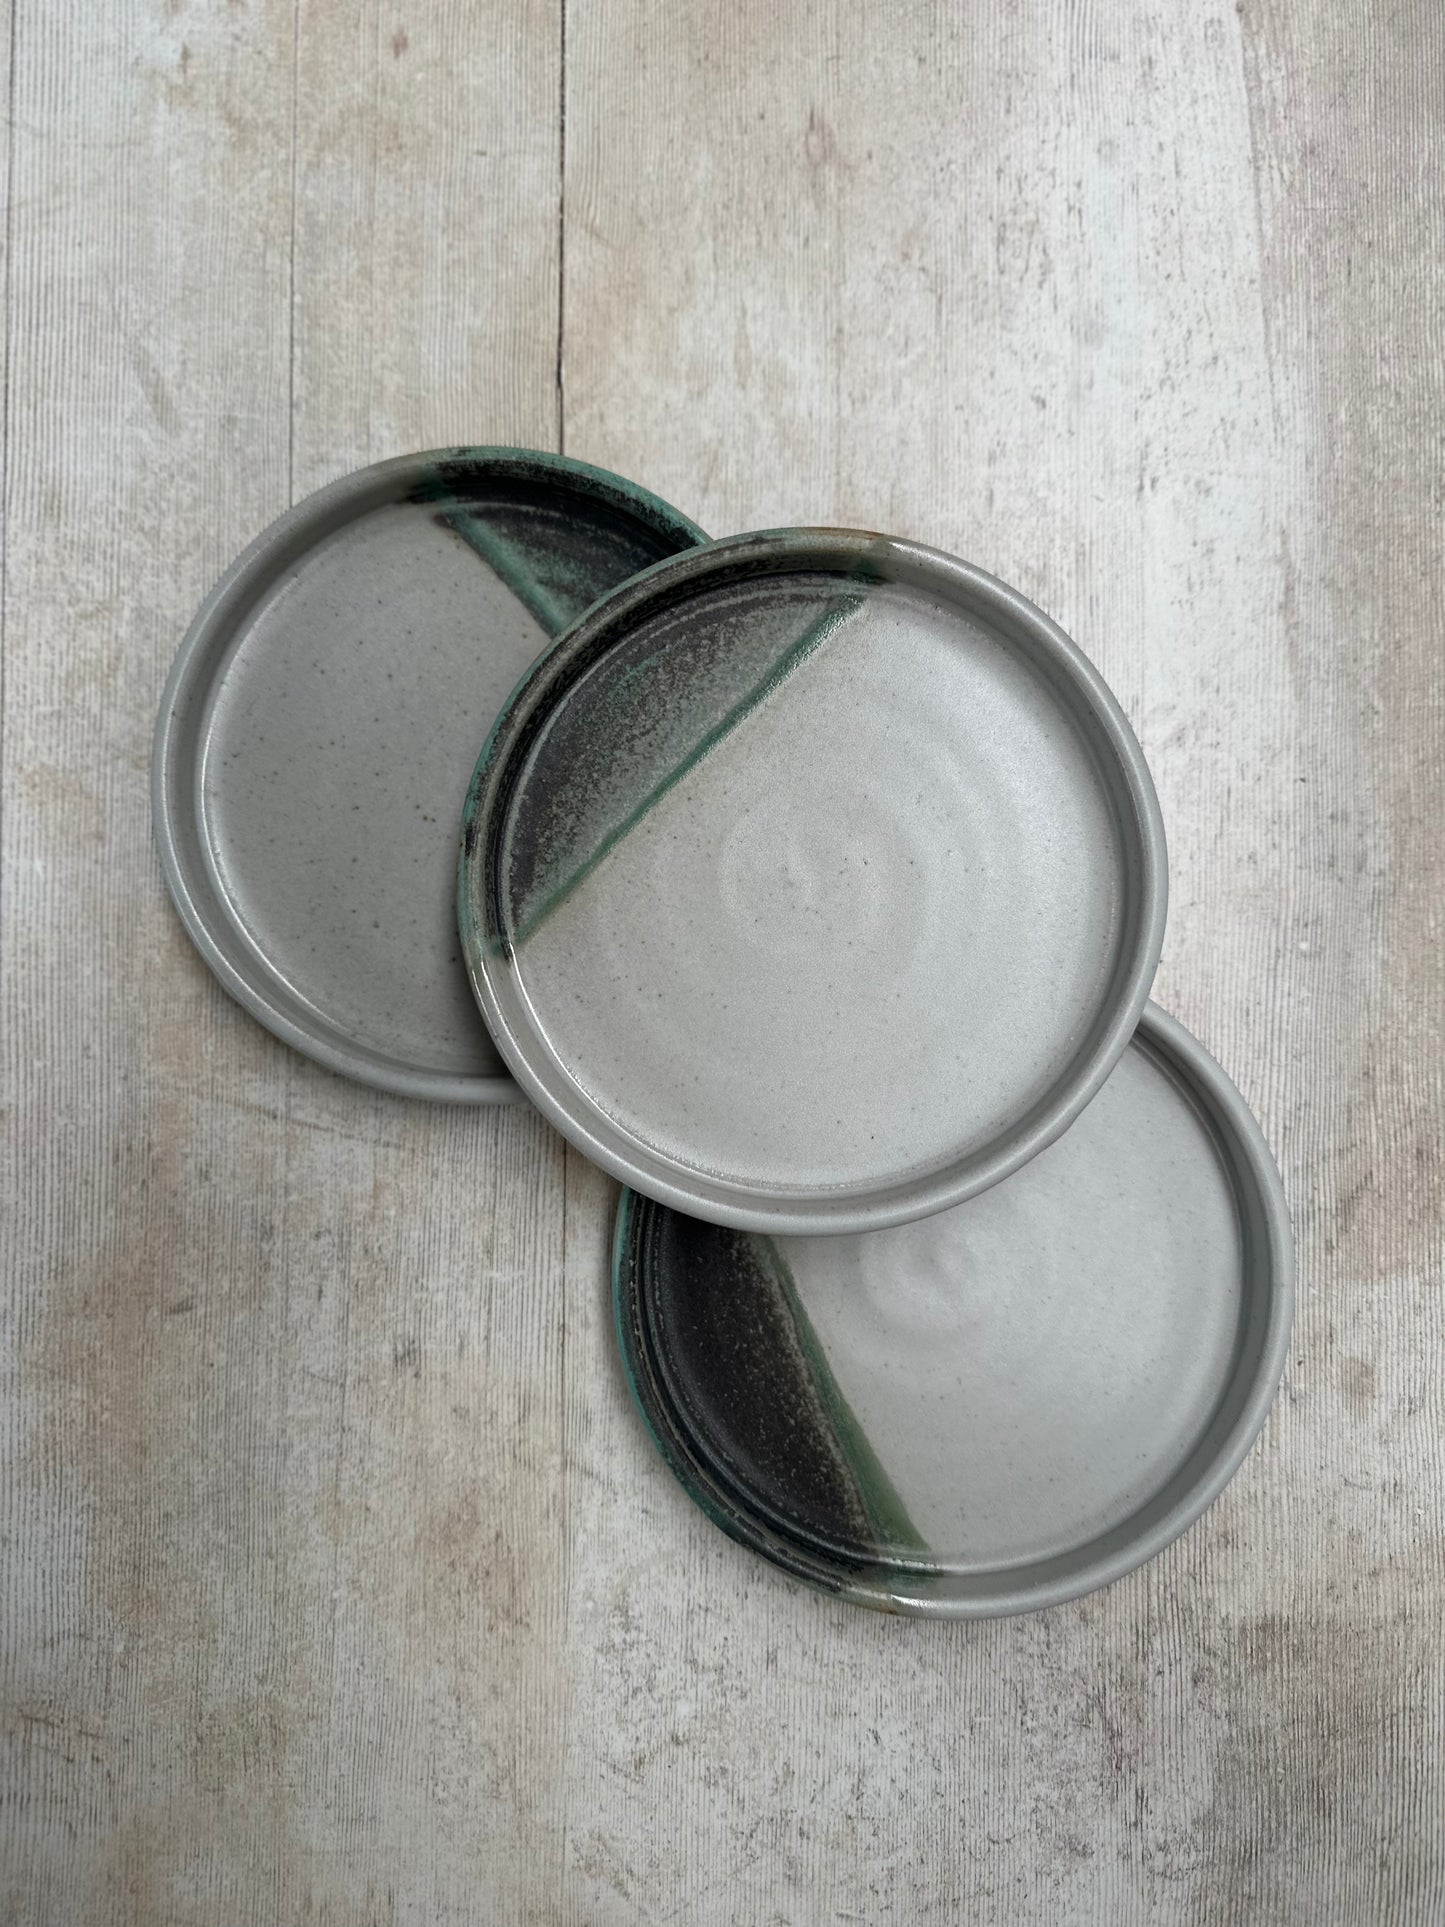 Lipped plates (Signature Collection)